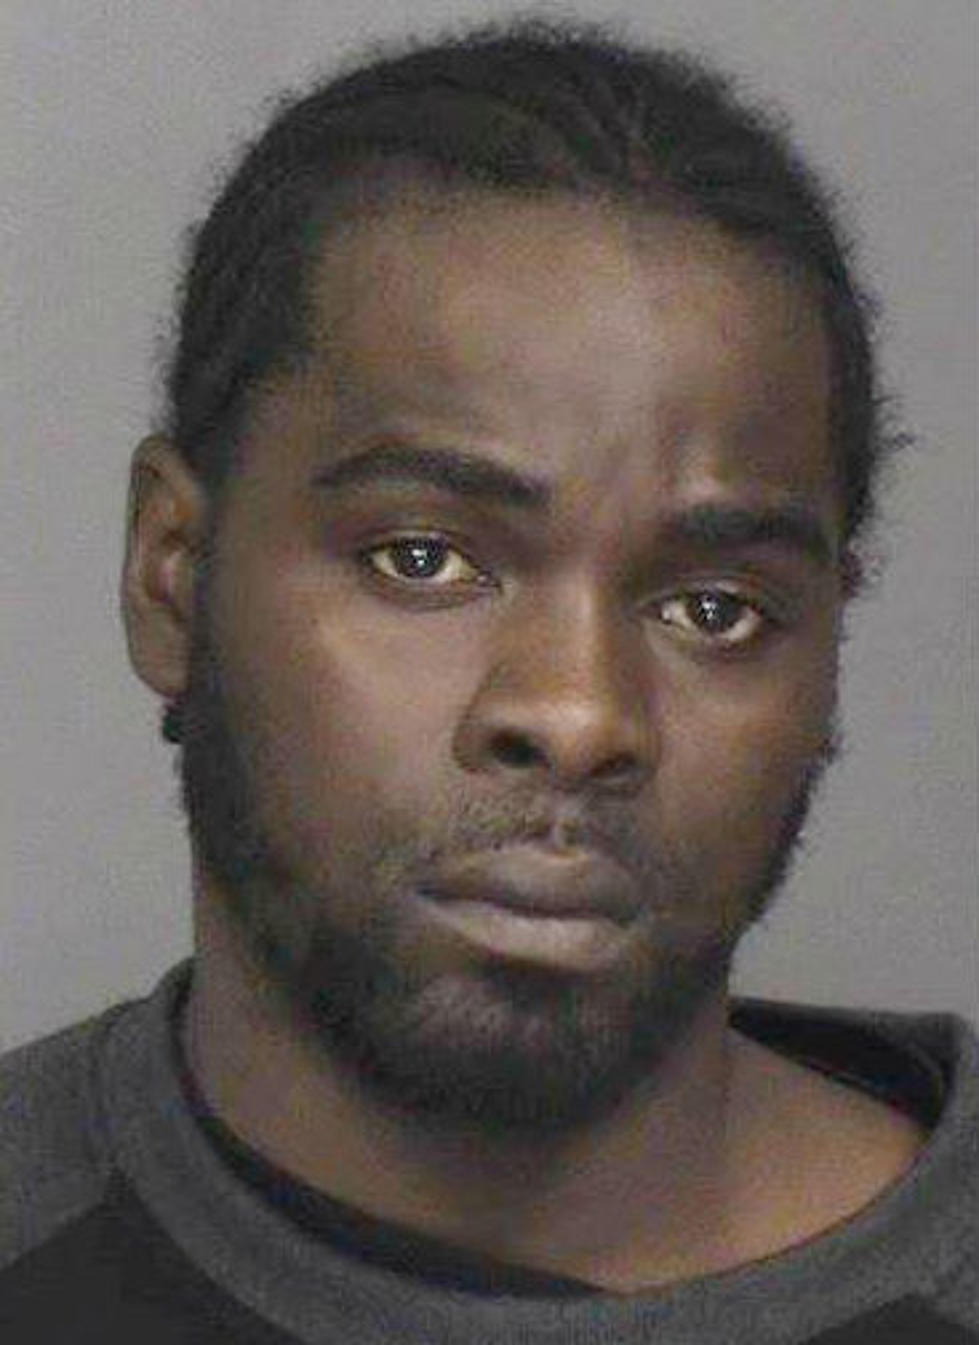 Man Arrested After Allegedly Bringing Package of Cocaine to JFK Middle School in Utica